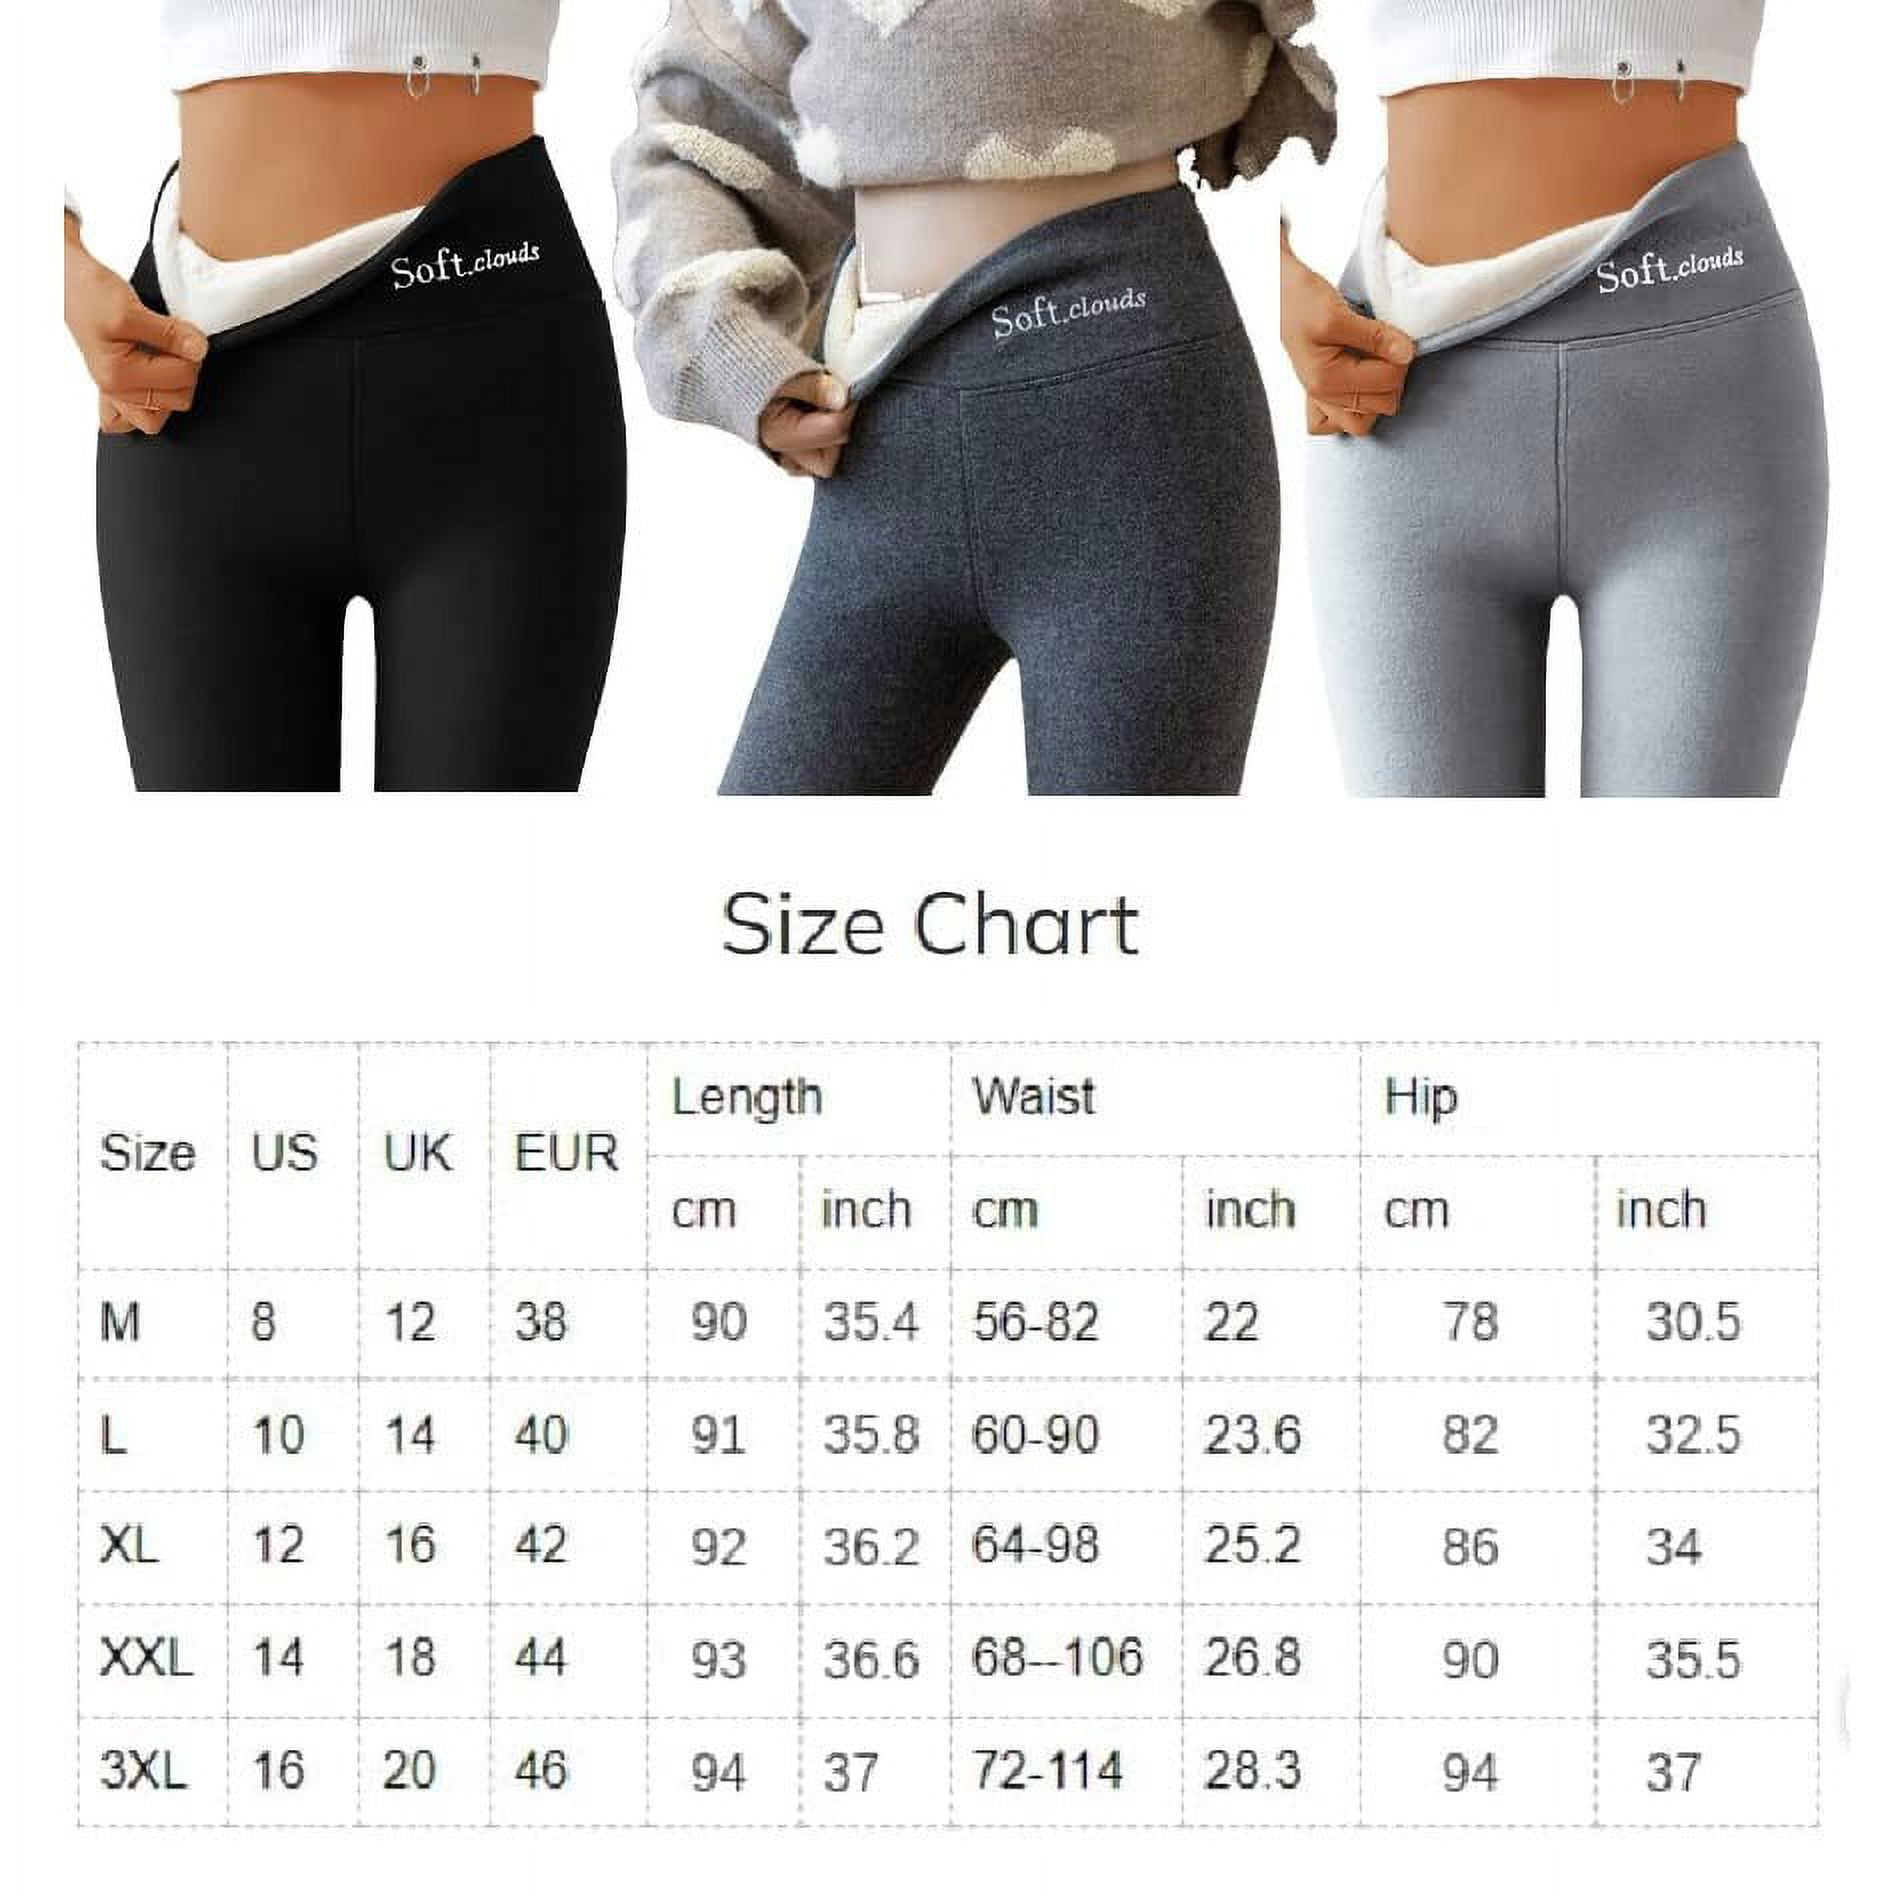  AQWEI Soft Clouds Leggings for Women, Soft Clouds Fleece  Leggings Casual Warm Winter Solid Pants (Large,Fleece Lining Black) :  Clothing, Shoes & Jewelry